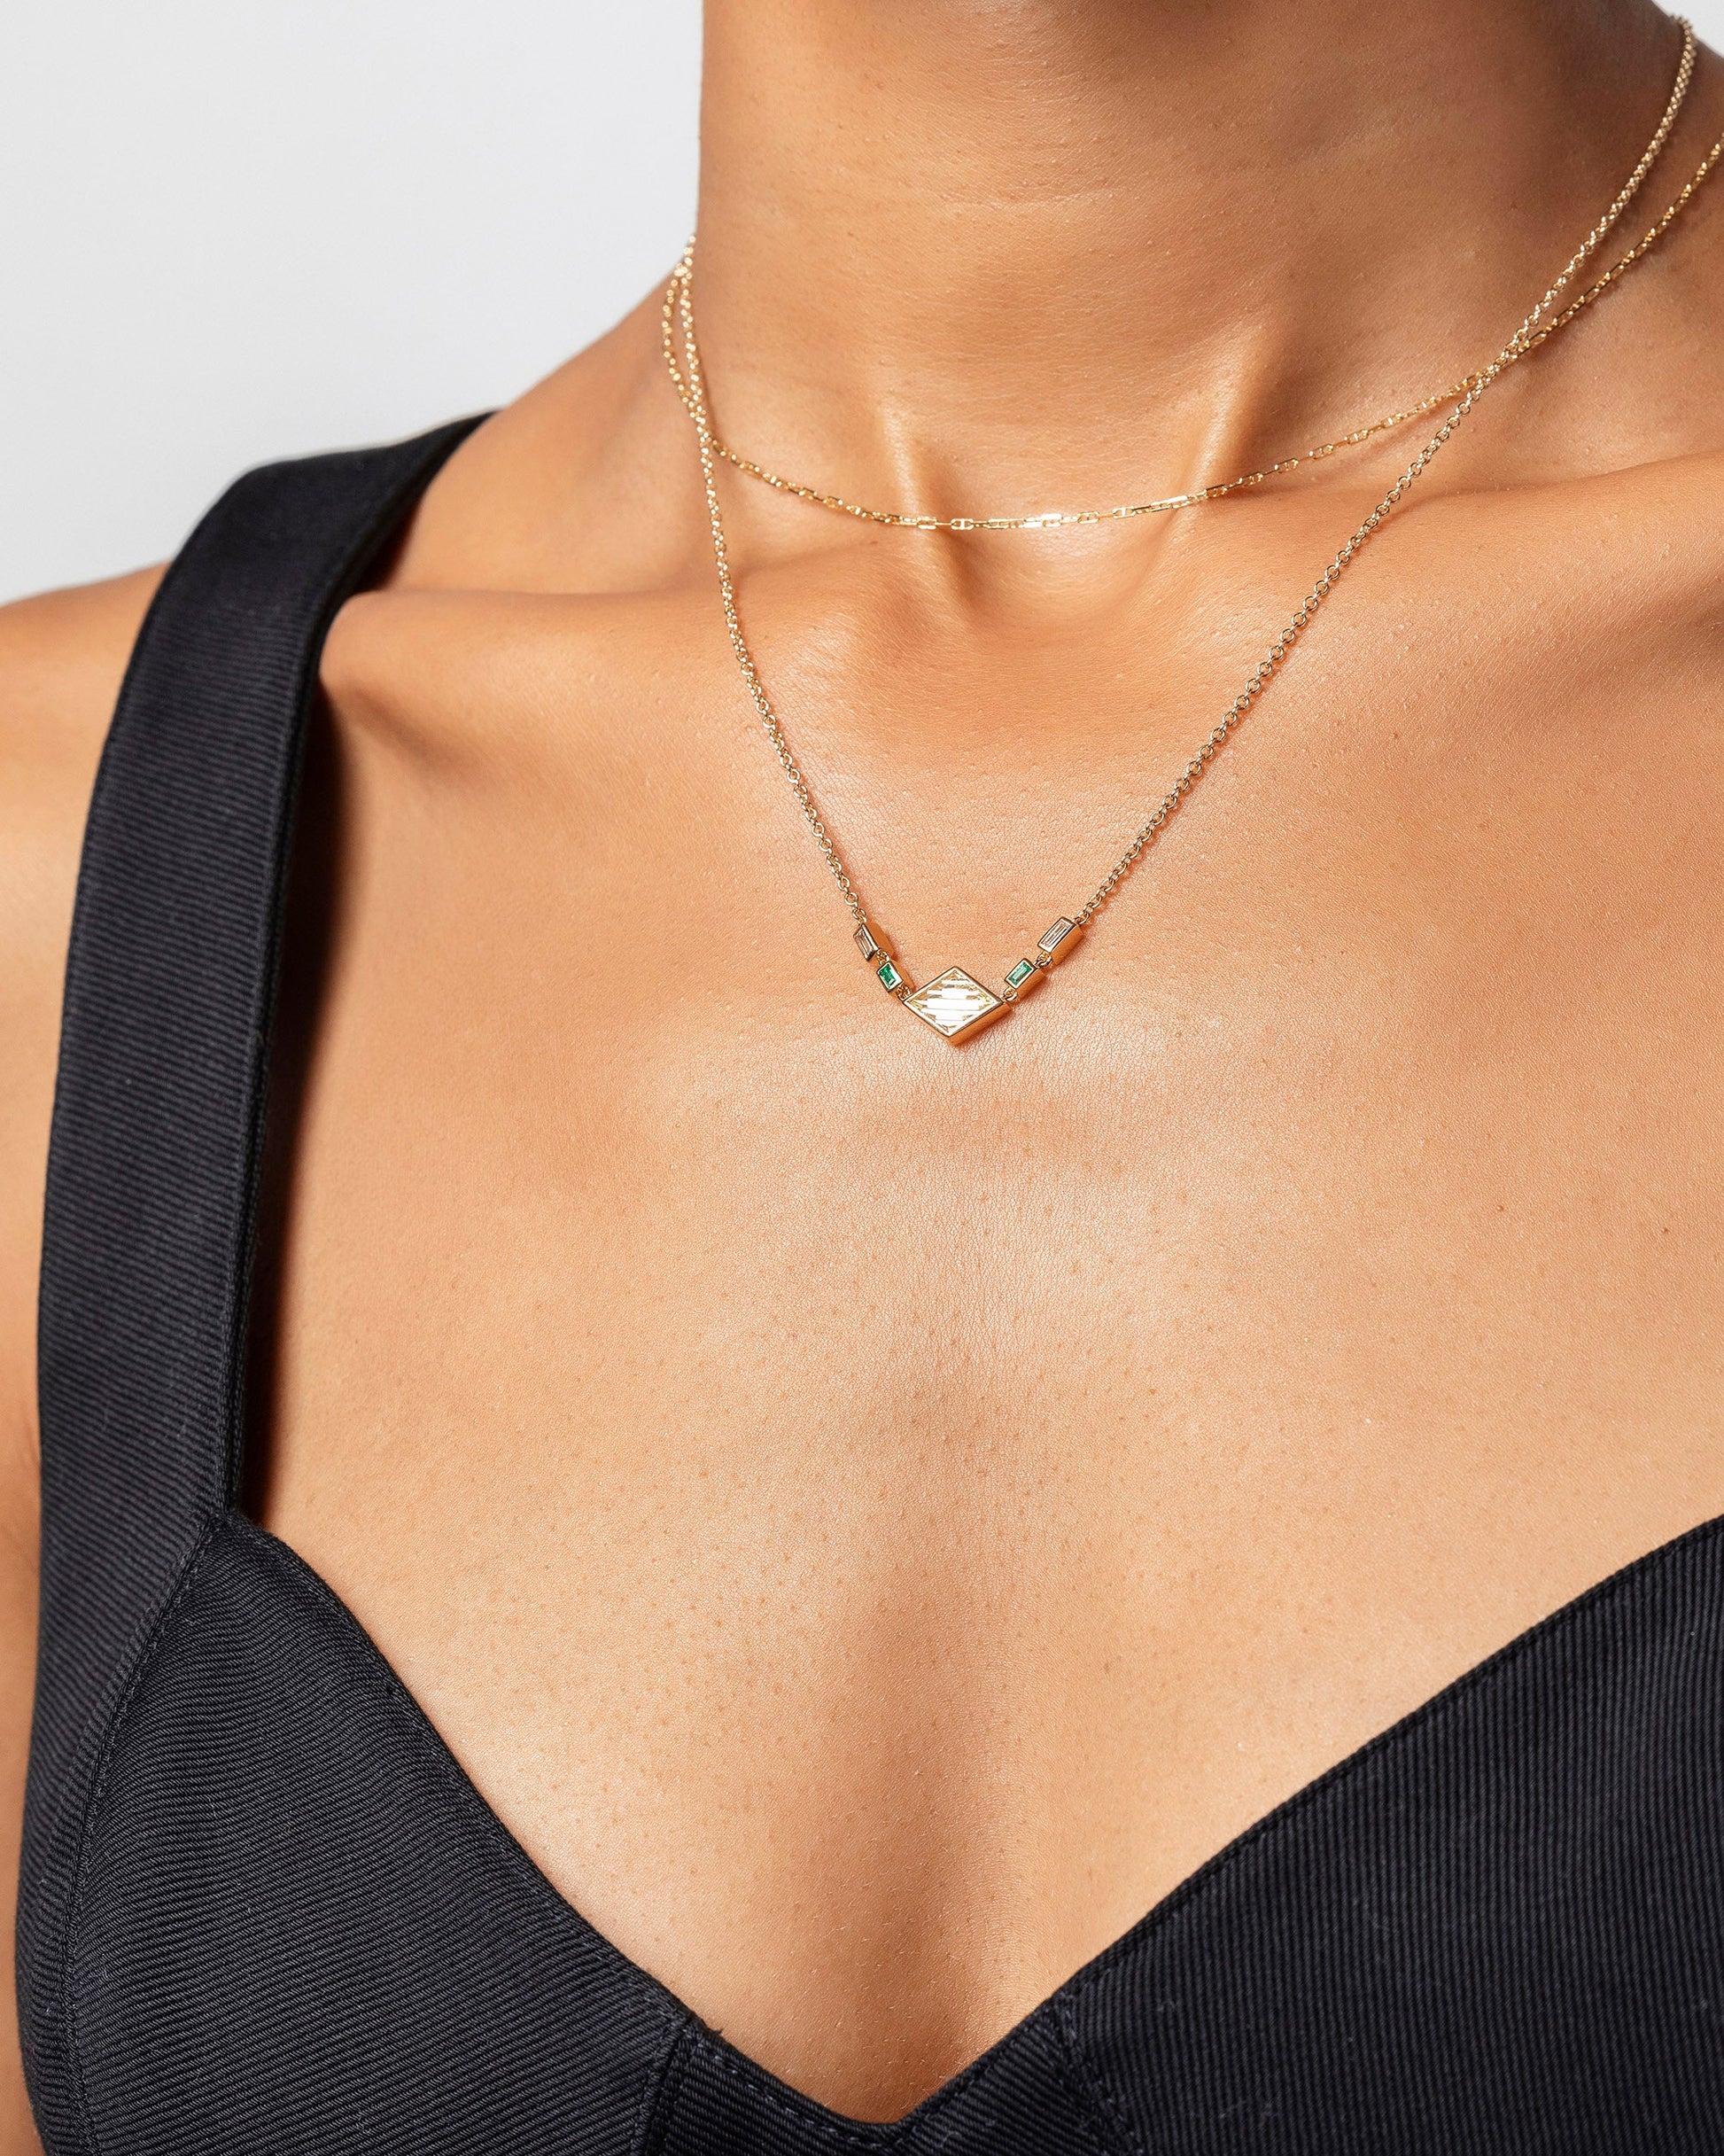 Radical Abstraction Necklace on model.